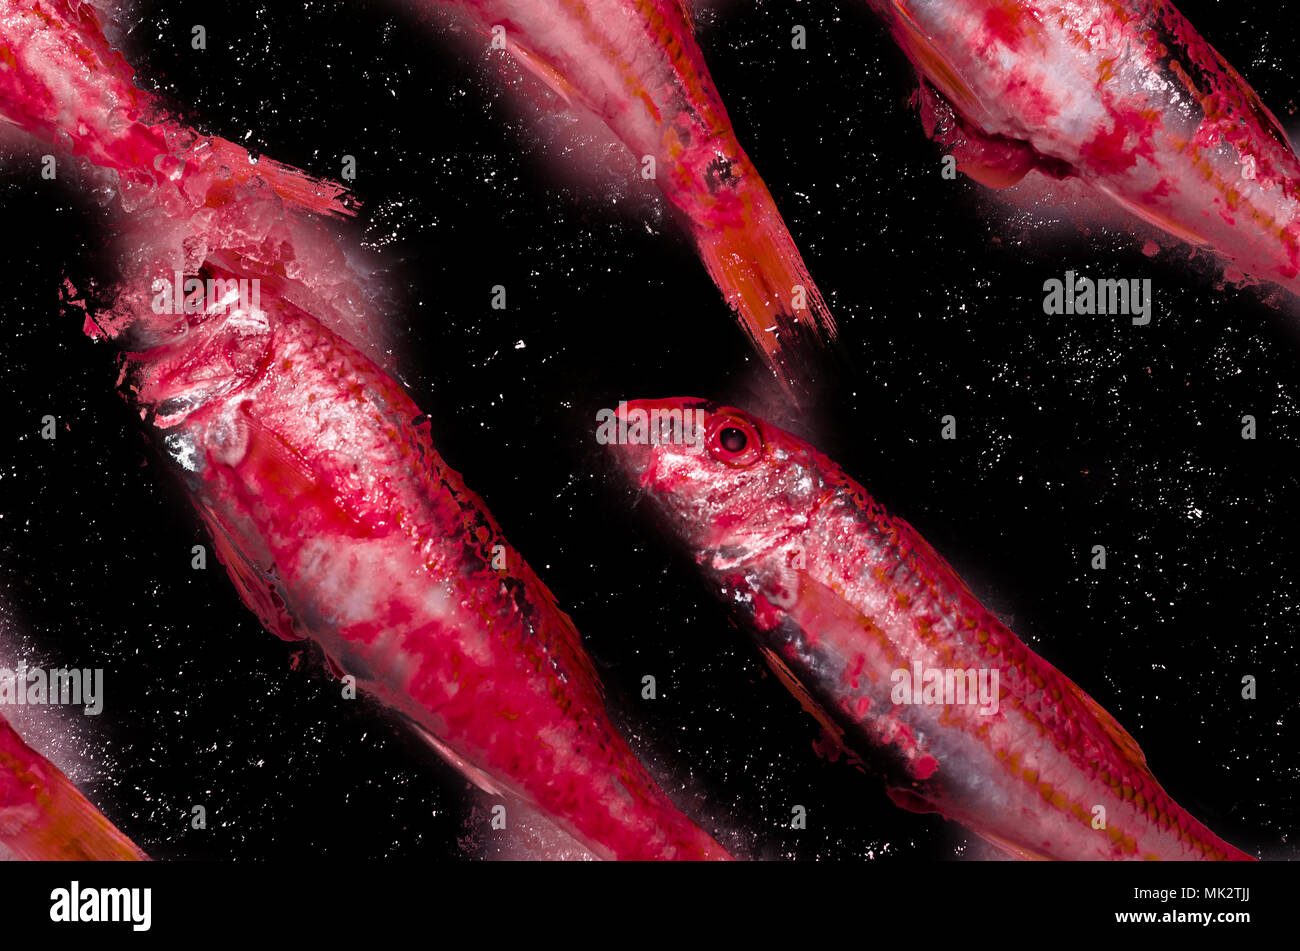 Colorful illustration of fresh fish on a market stall Stock Photo